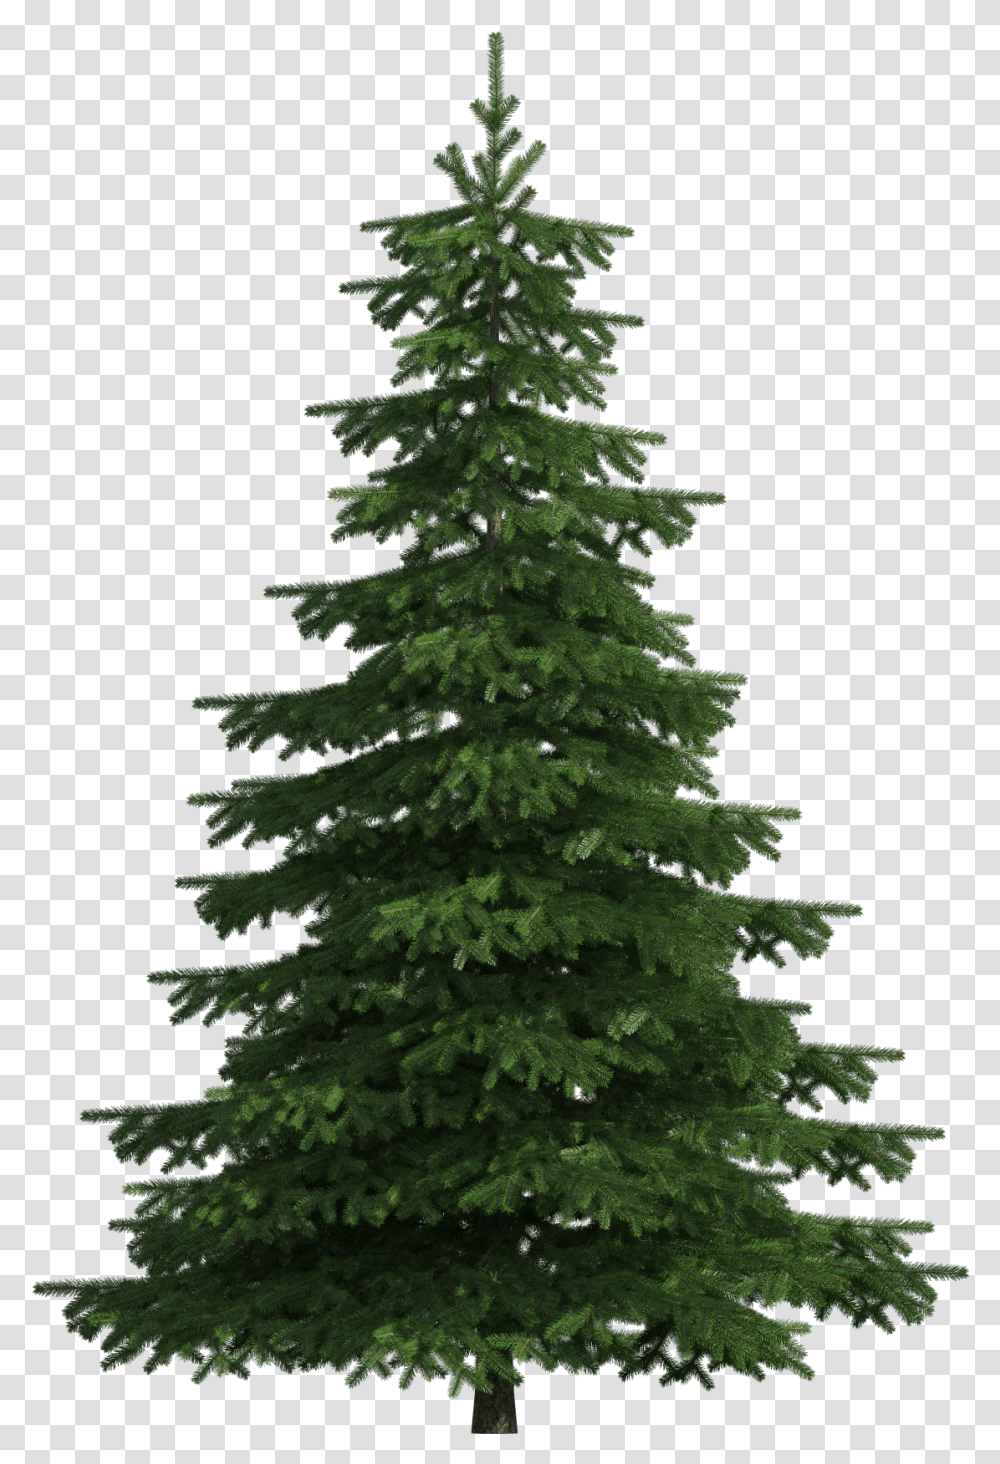 Tree Clipart Realistic Download Background Pine Tree, Plant, Christmas Tree, Ornament, Fir Transparent Png